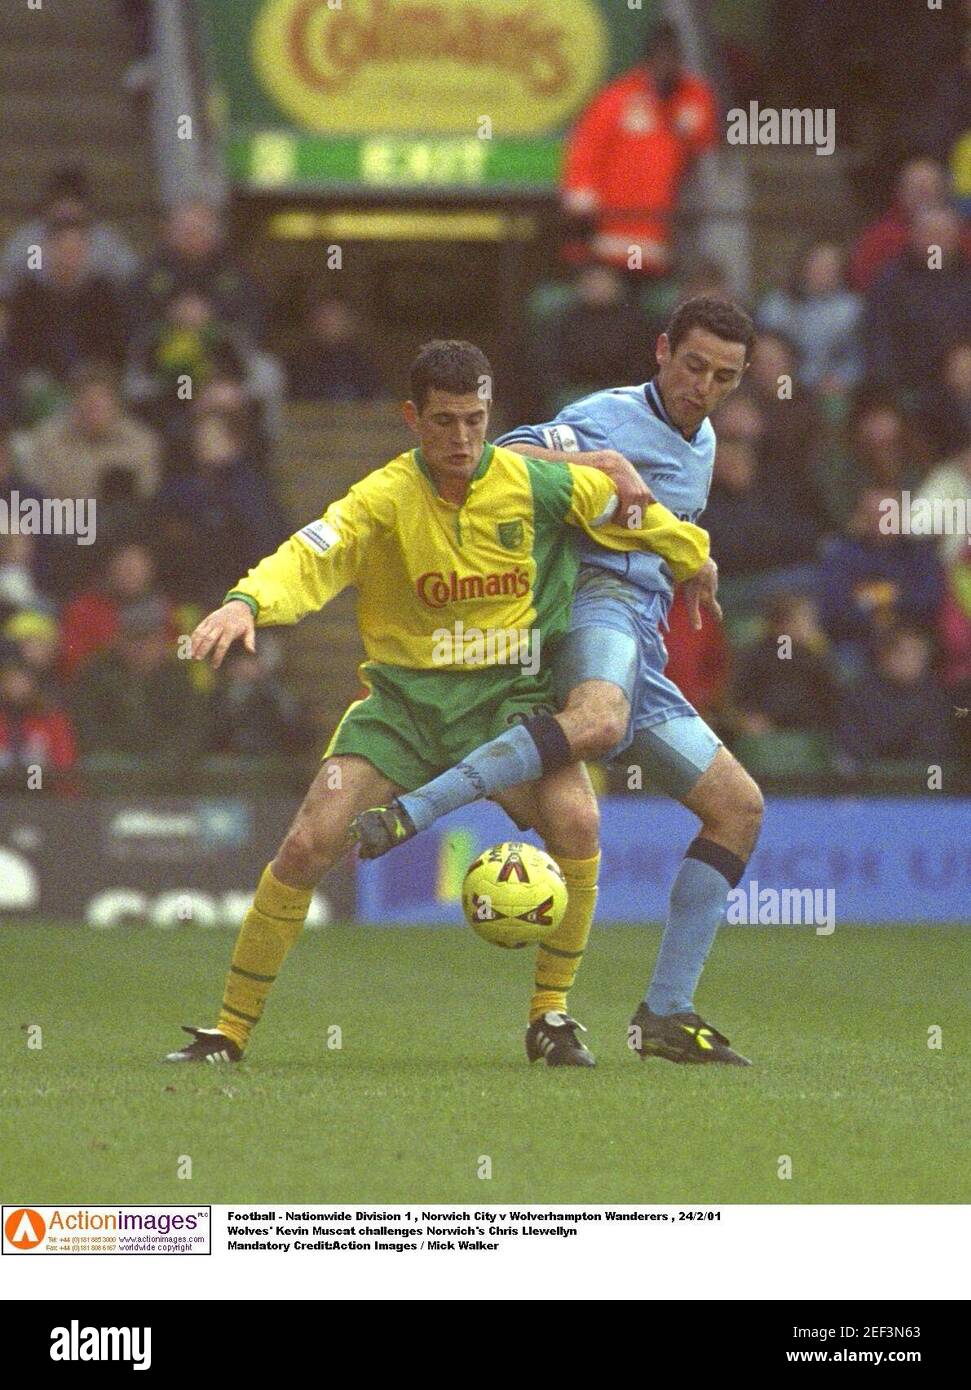 Football - Nationwide Division 1 , Norwich City v Wolverhampton Wanderers ,  24/2/01 Wolves' Kevin Muscat challenges Norwich's Chris Llewellyn Mandatory  Credit:Action Images / Mick Walker Stock Photo - Alamy